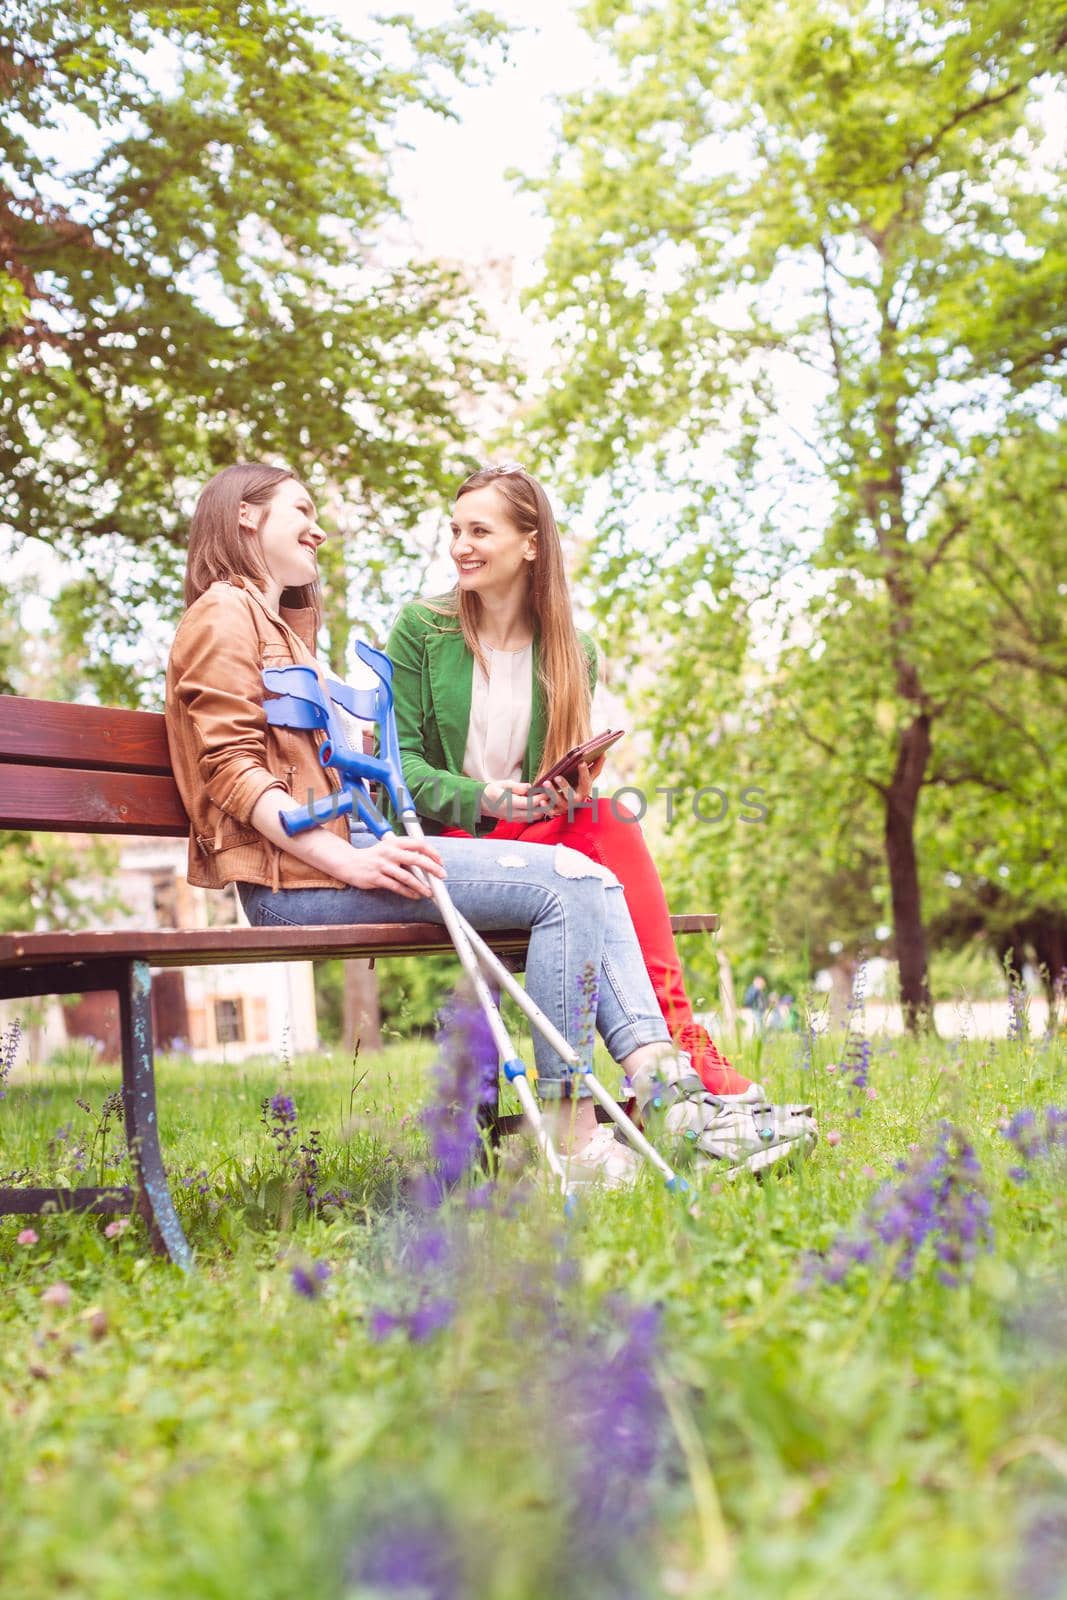 Two women, one healthy and one with a sprained foot, on a bench in the park